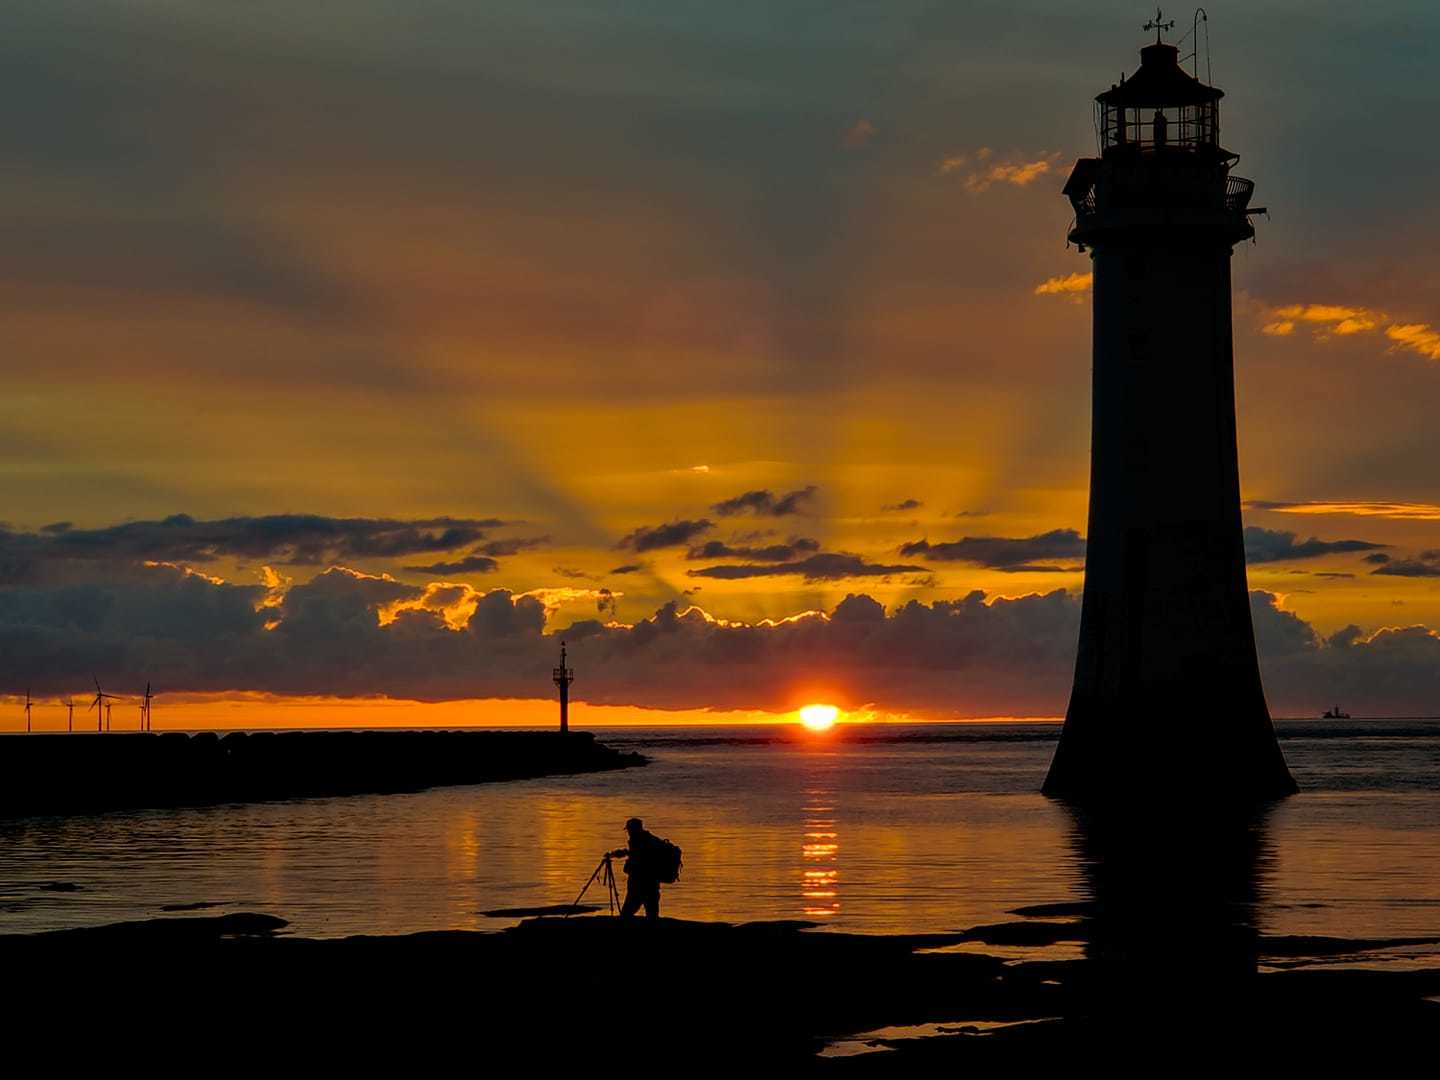 New Brighton lighthouse at sunset by Tony Crawford